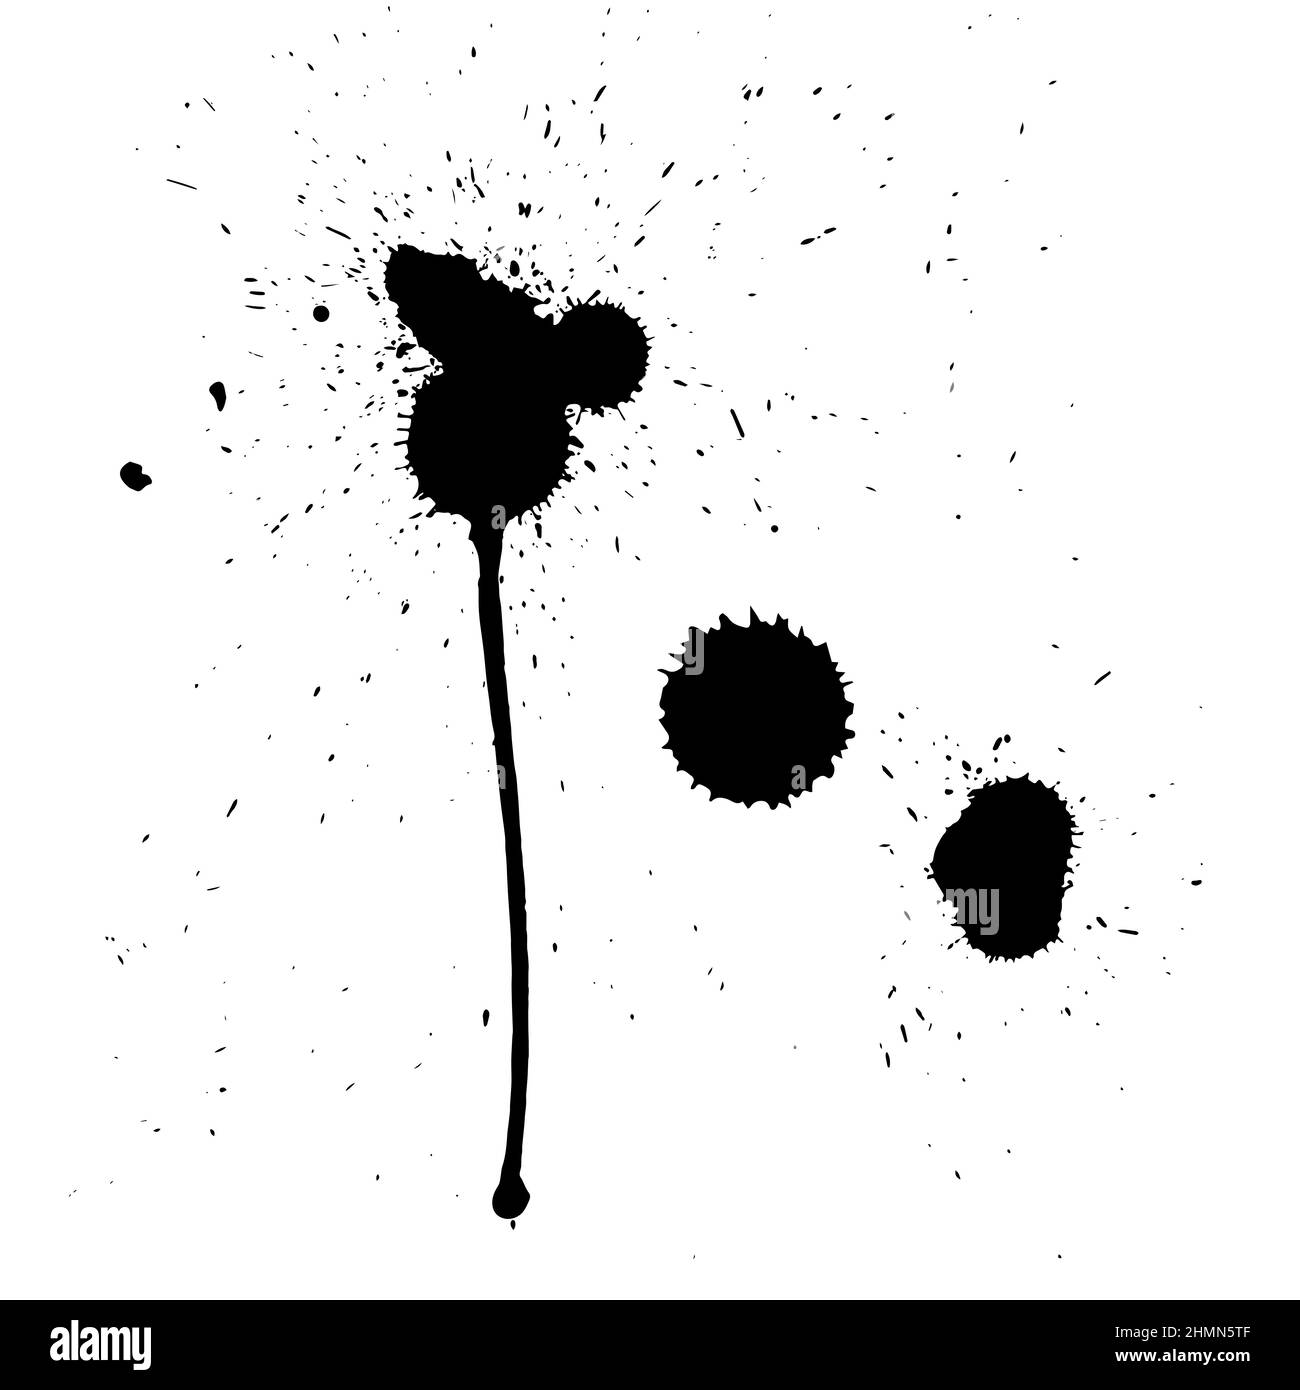 Ink spots made by falling ink from a height. Black spots on a white ...